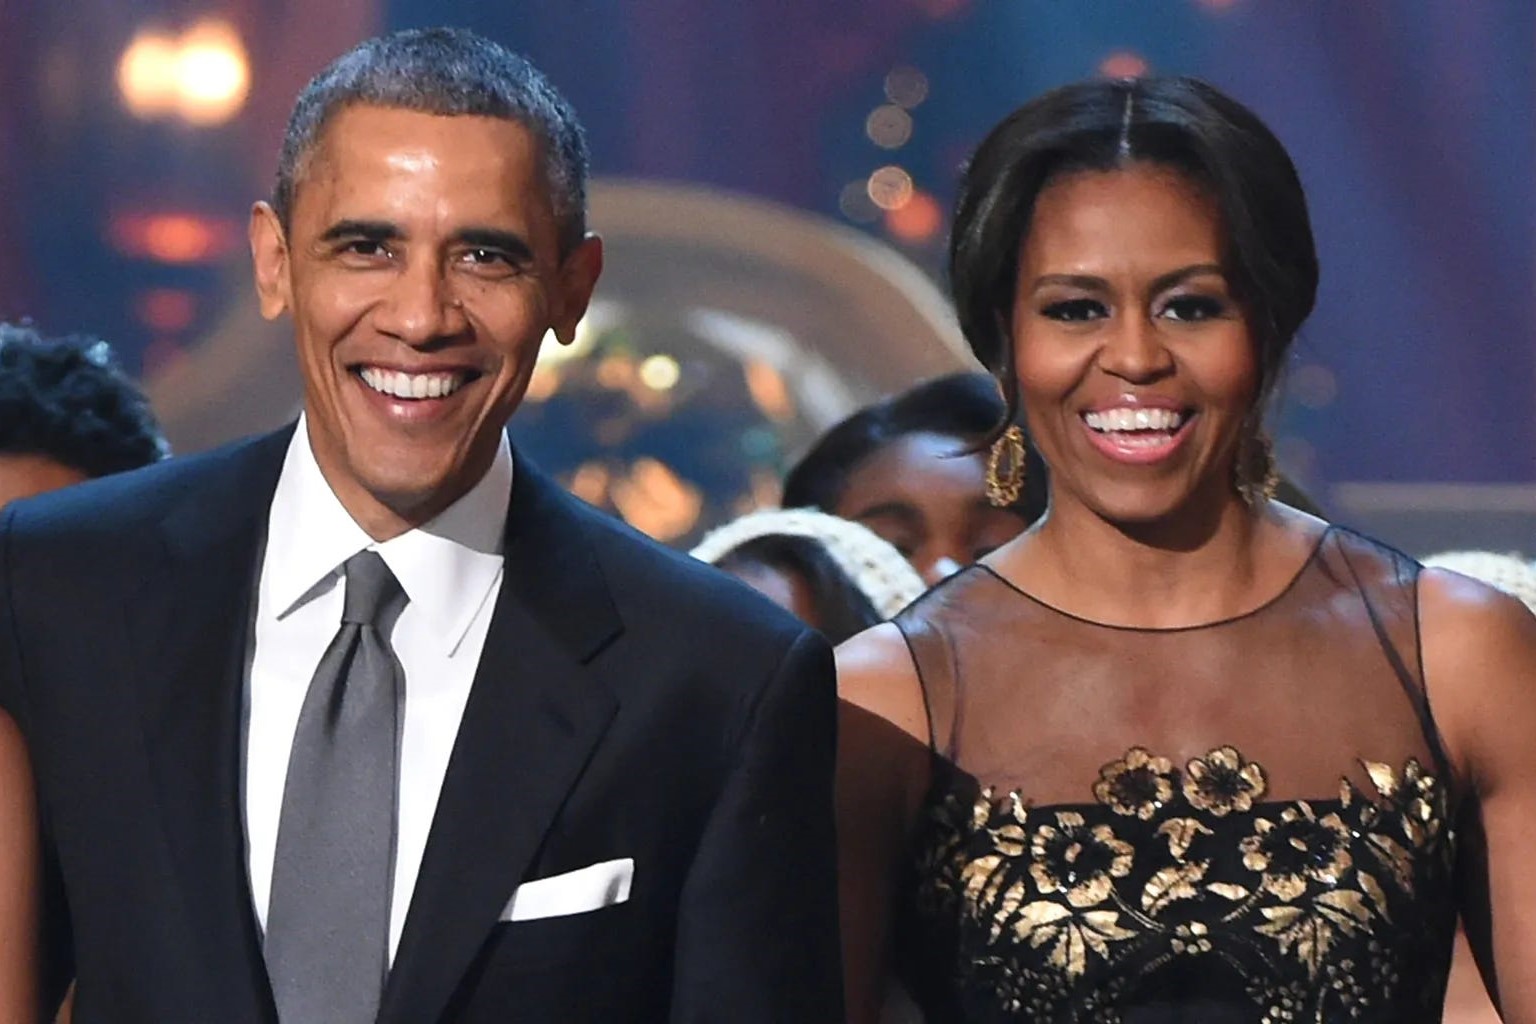 Shocking Photo Reveals Obama's Secret Connection To Michelle's Lookalike Brother! Plus, Rare Photos Of Michelle Pregnant And With Newborn Daughters!